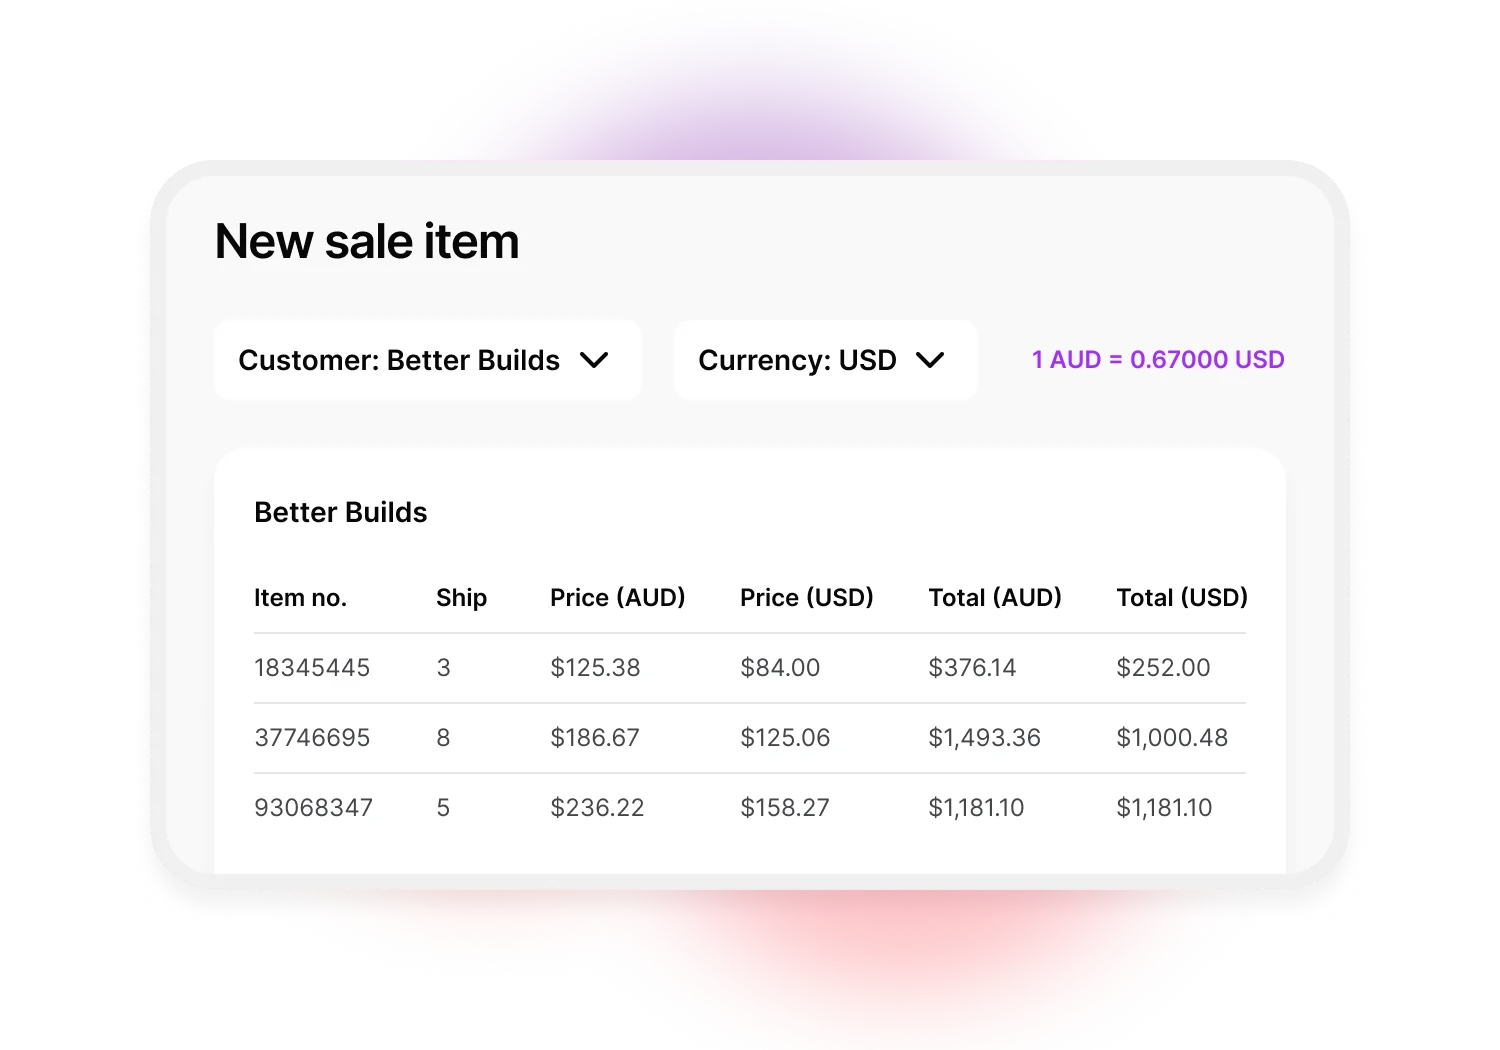 The new sale item screen includes two dropdown menus, one to filter by customer and another to filter by currency. Next to these options is the current conversion rate for the selected currency. Below this a table with item number, how many items to ship, item price in AUD, item price in selected currency, total price in AUD and total price in selected currency.